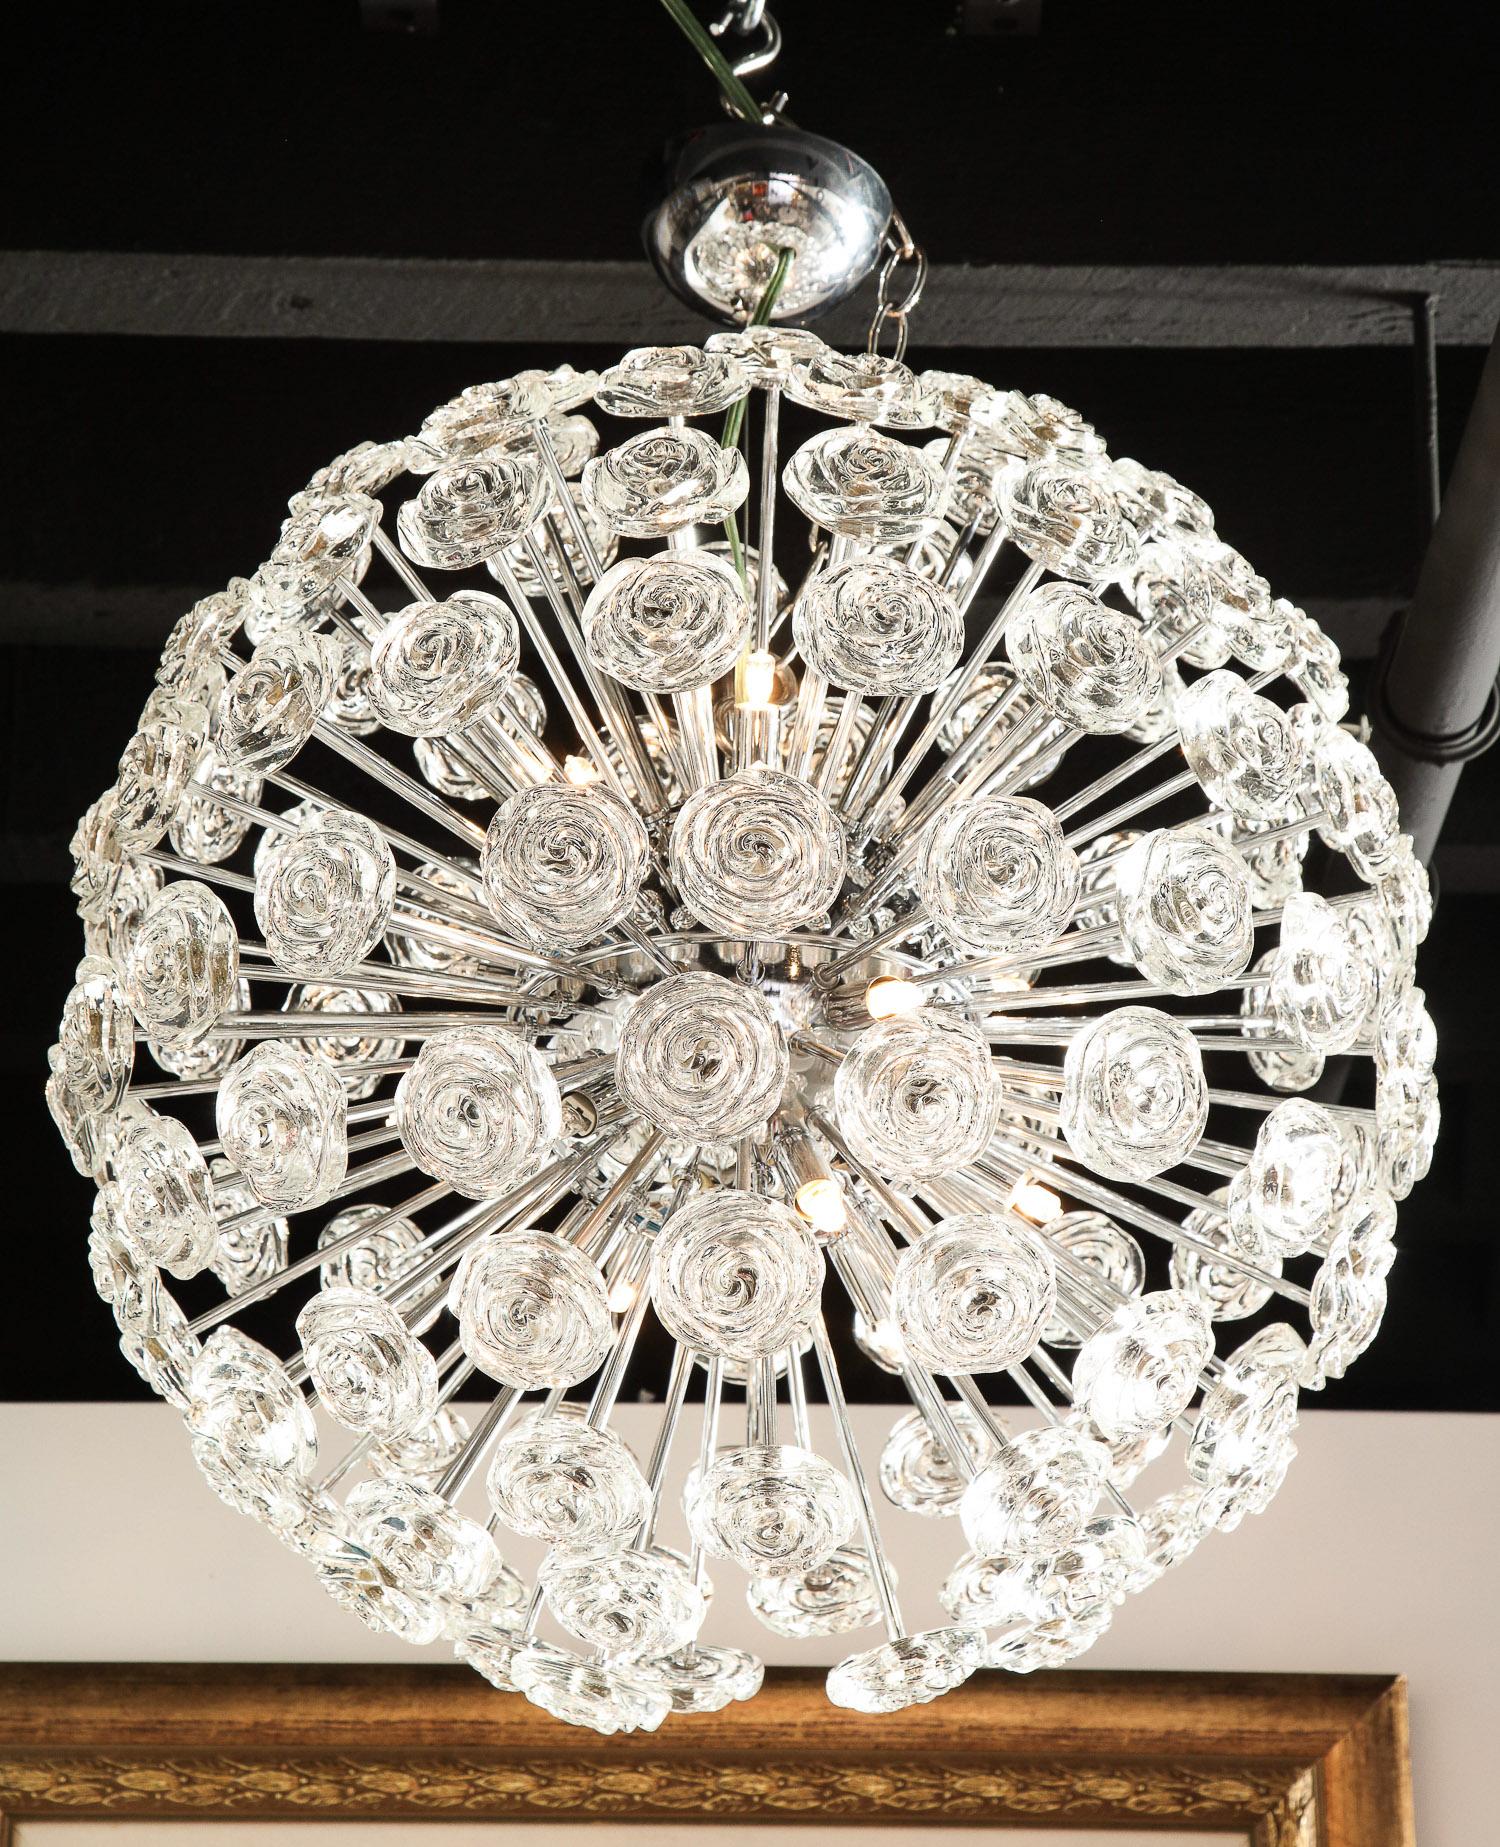 Italian Chandelier with Glass Roses, Midcentury Design, Italy, Large Chrome Sphere For Sale